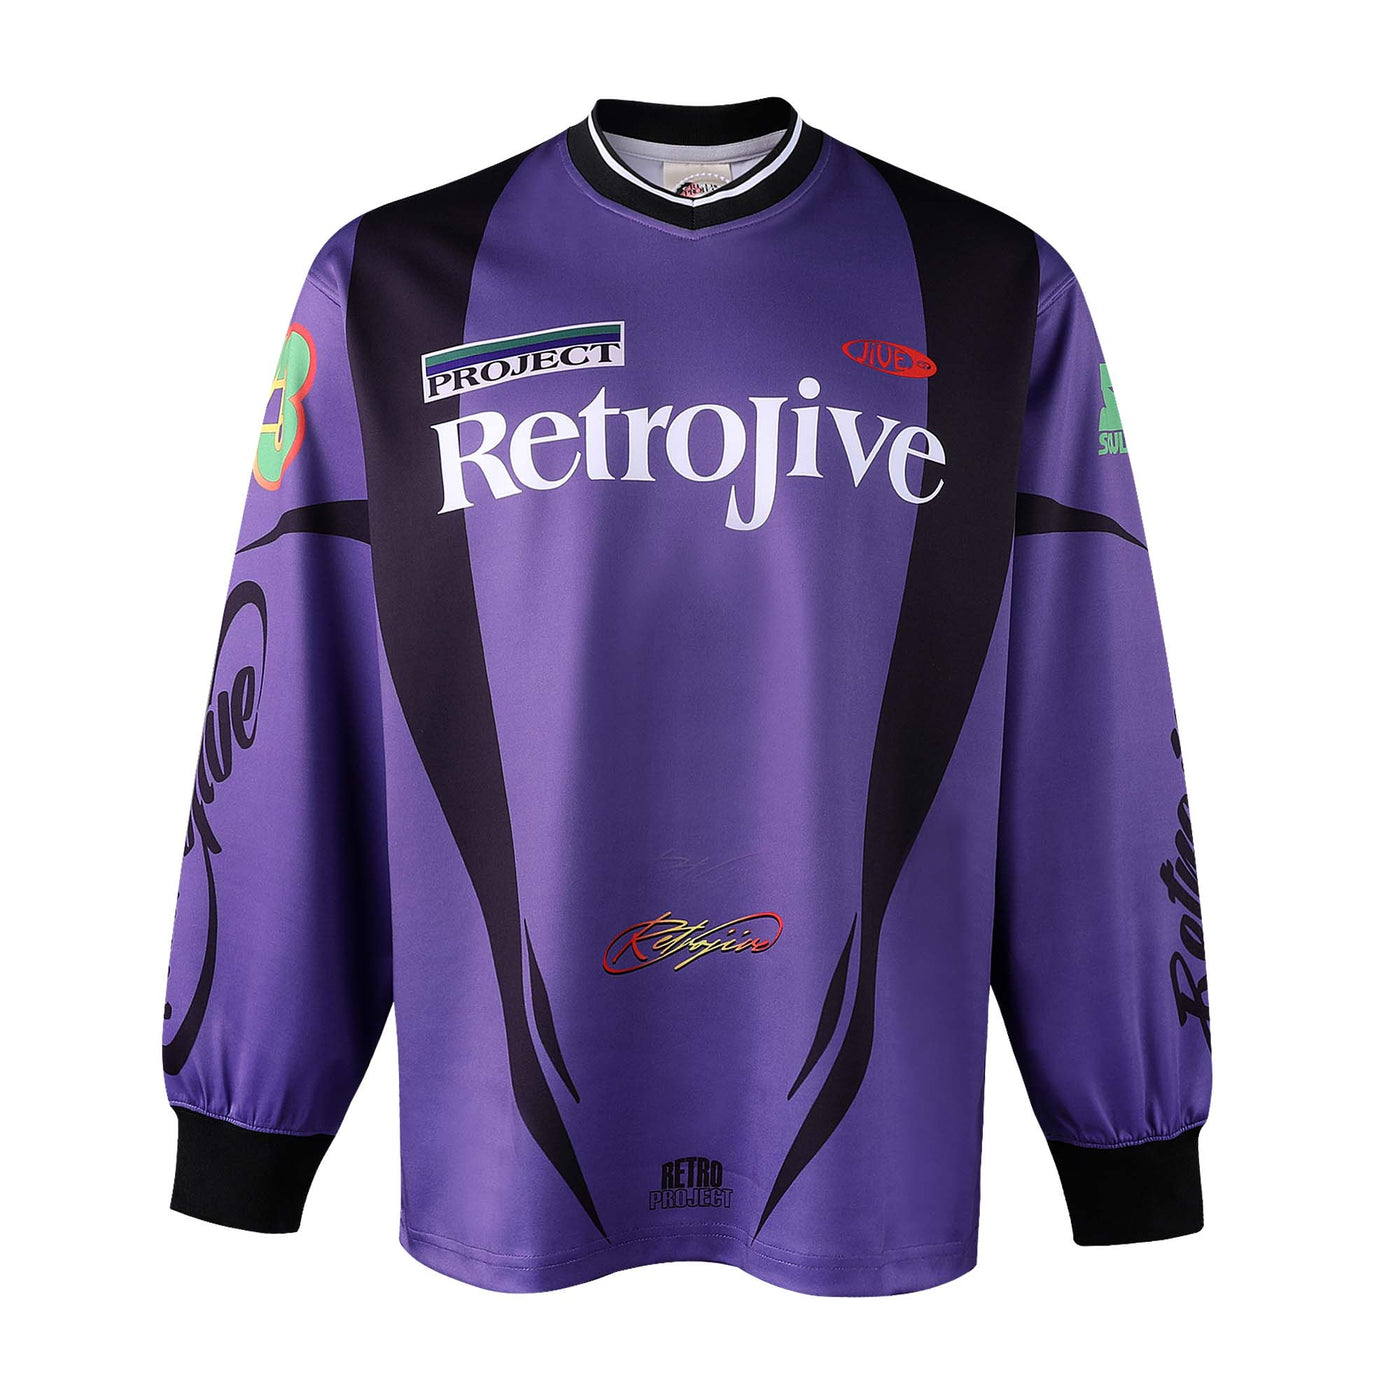 Retro Project Long Sleeve Racing Soccer Jersey Tee | Face 3 Face